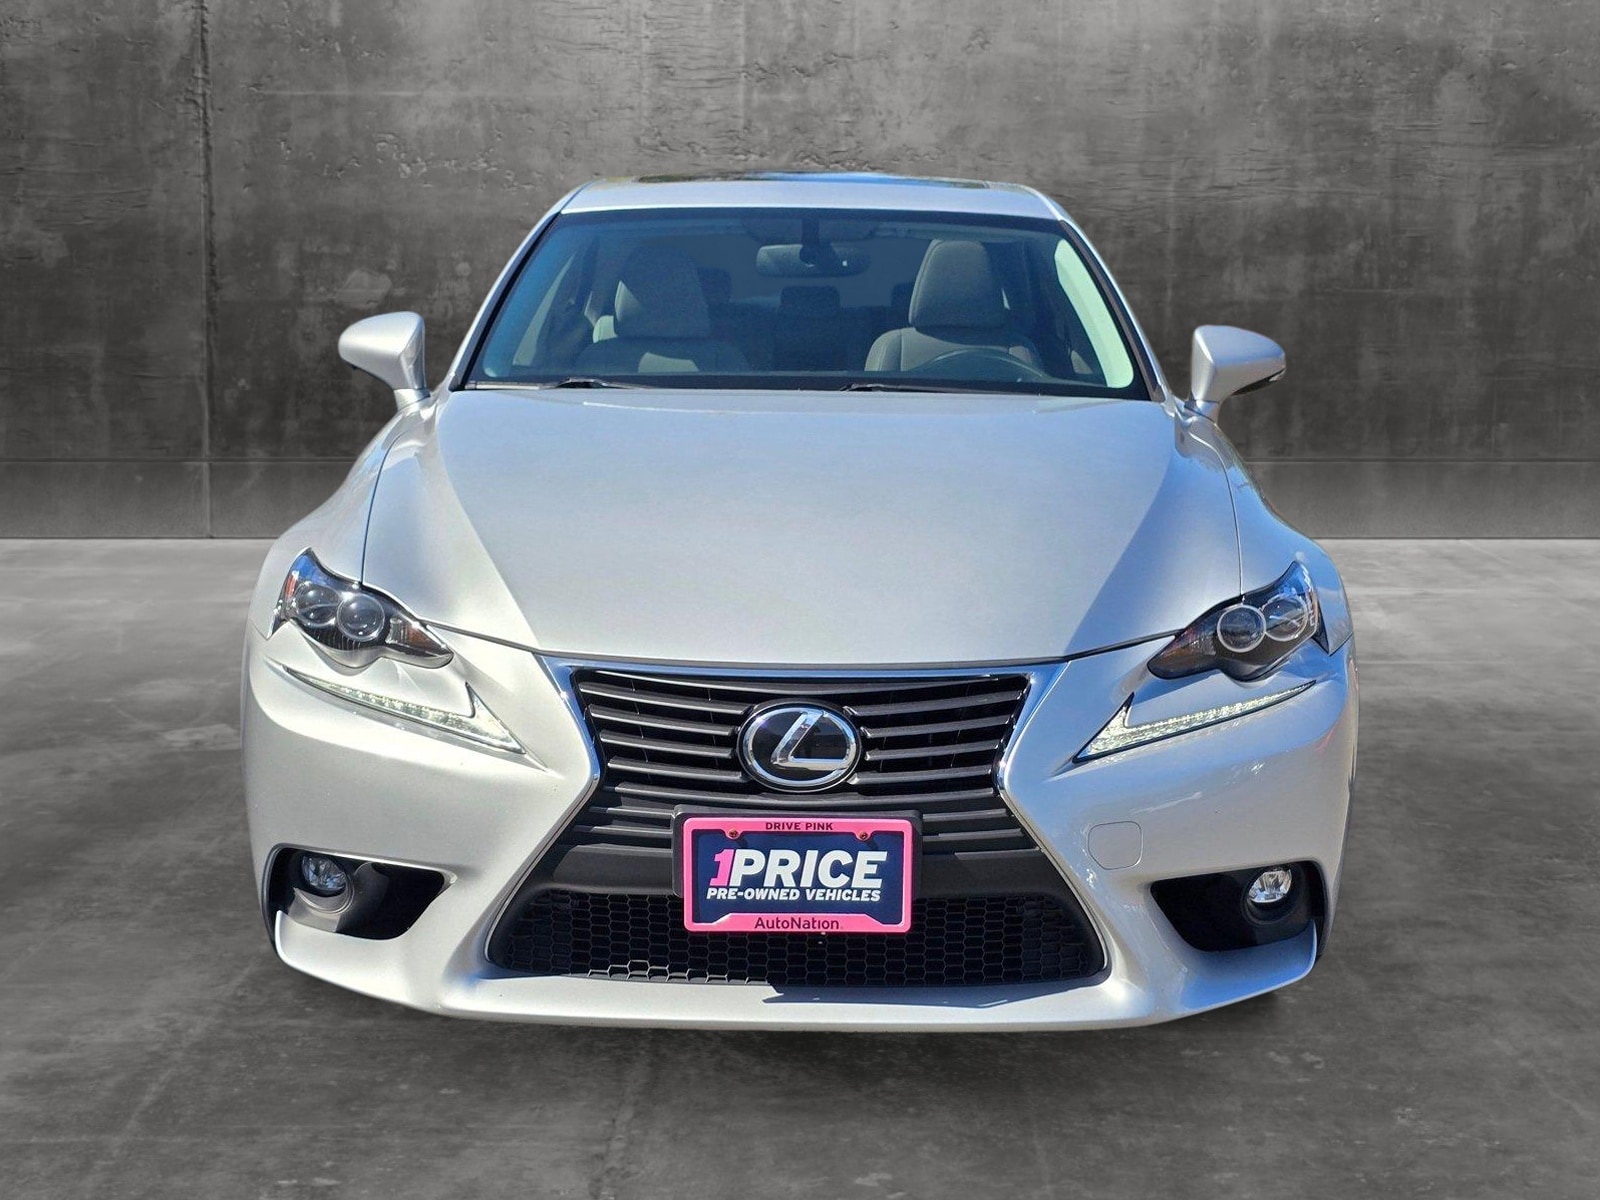 Used 2015 Lexus IS 250 with VIN JTHCF1D27F5020253 for sale in Renton, WA